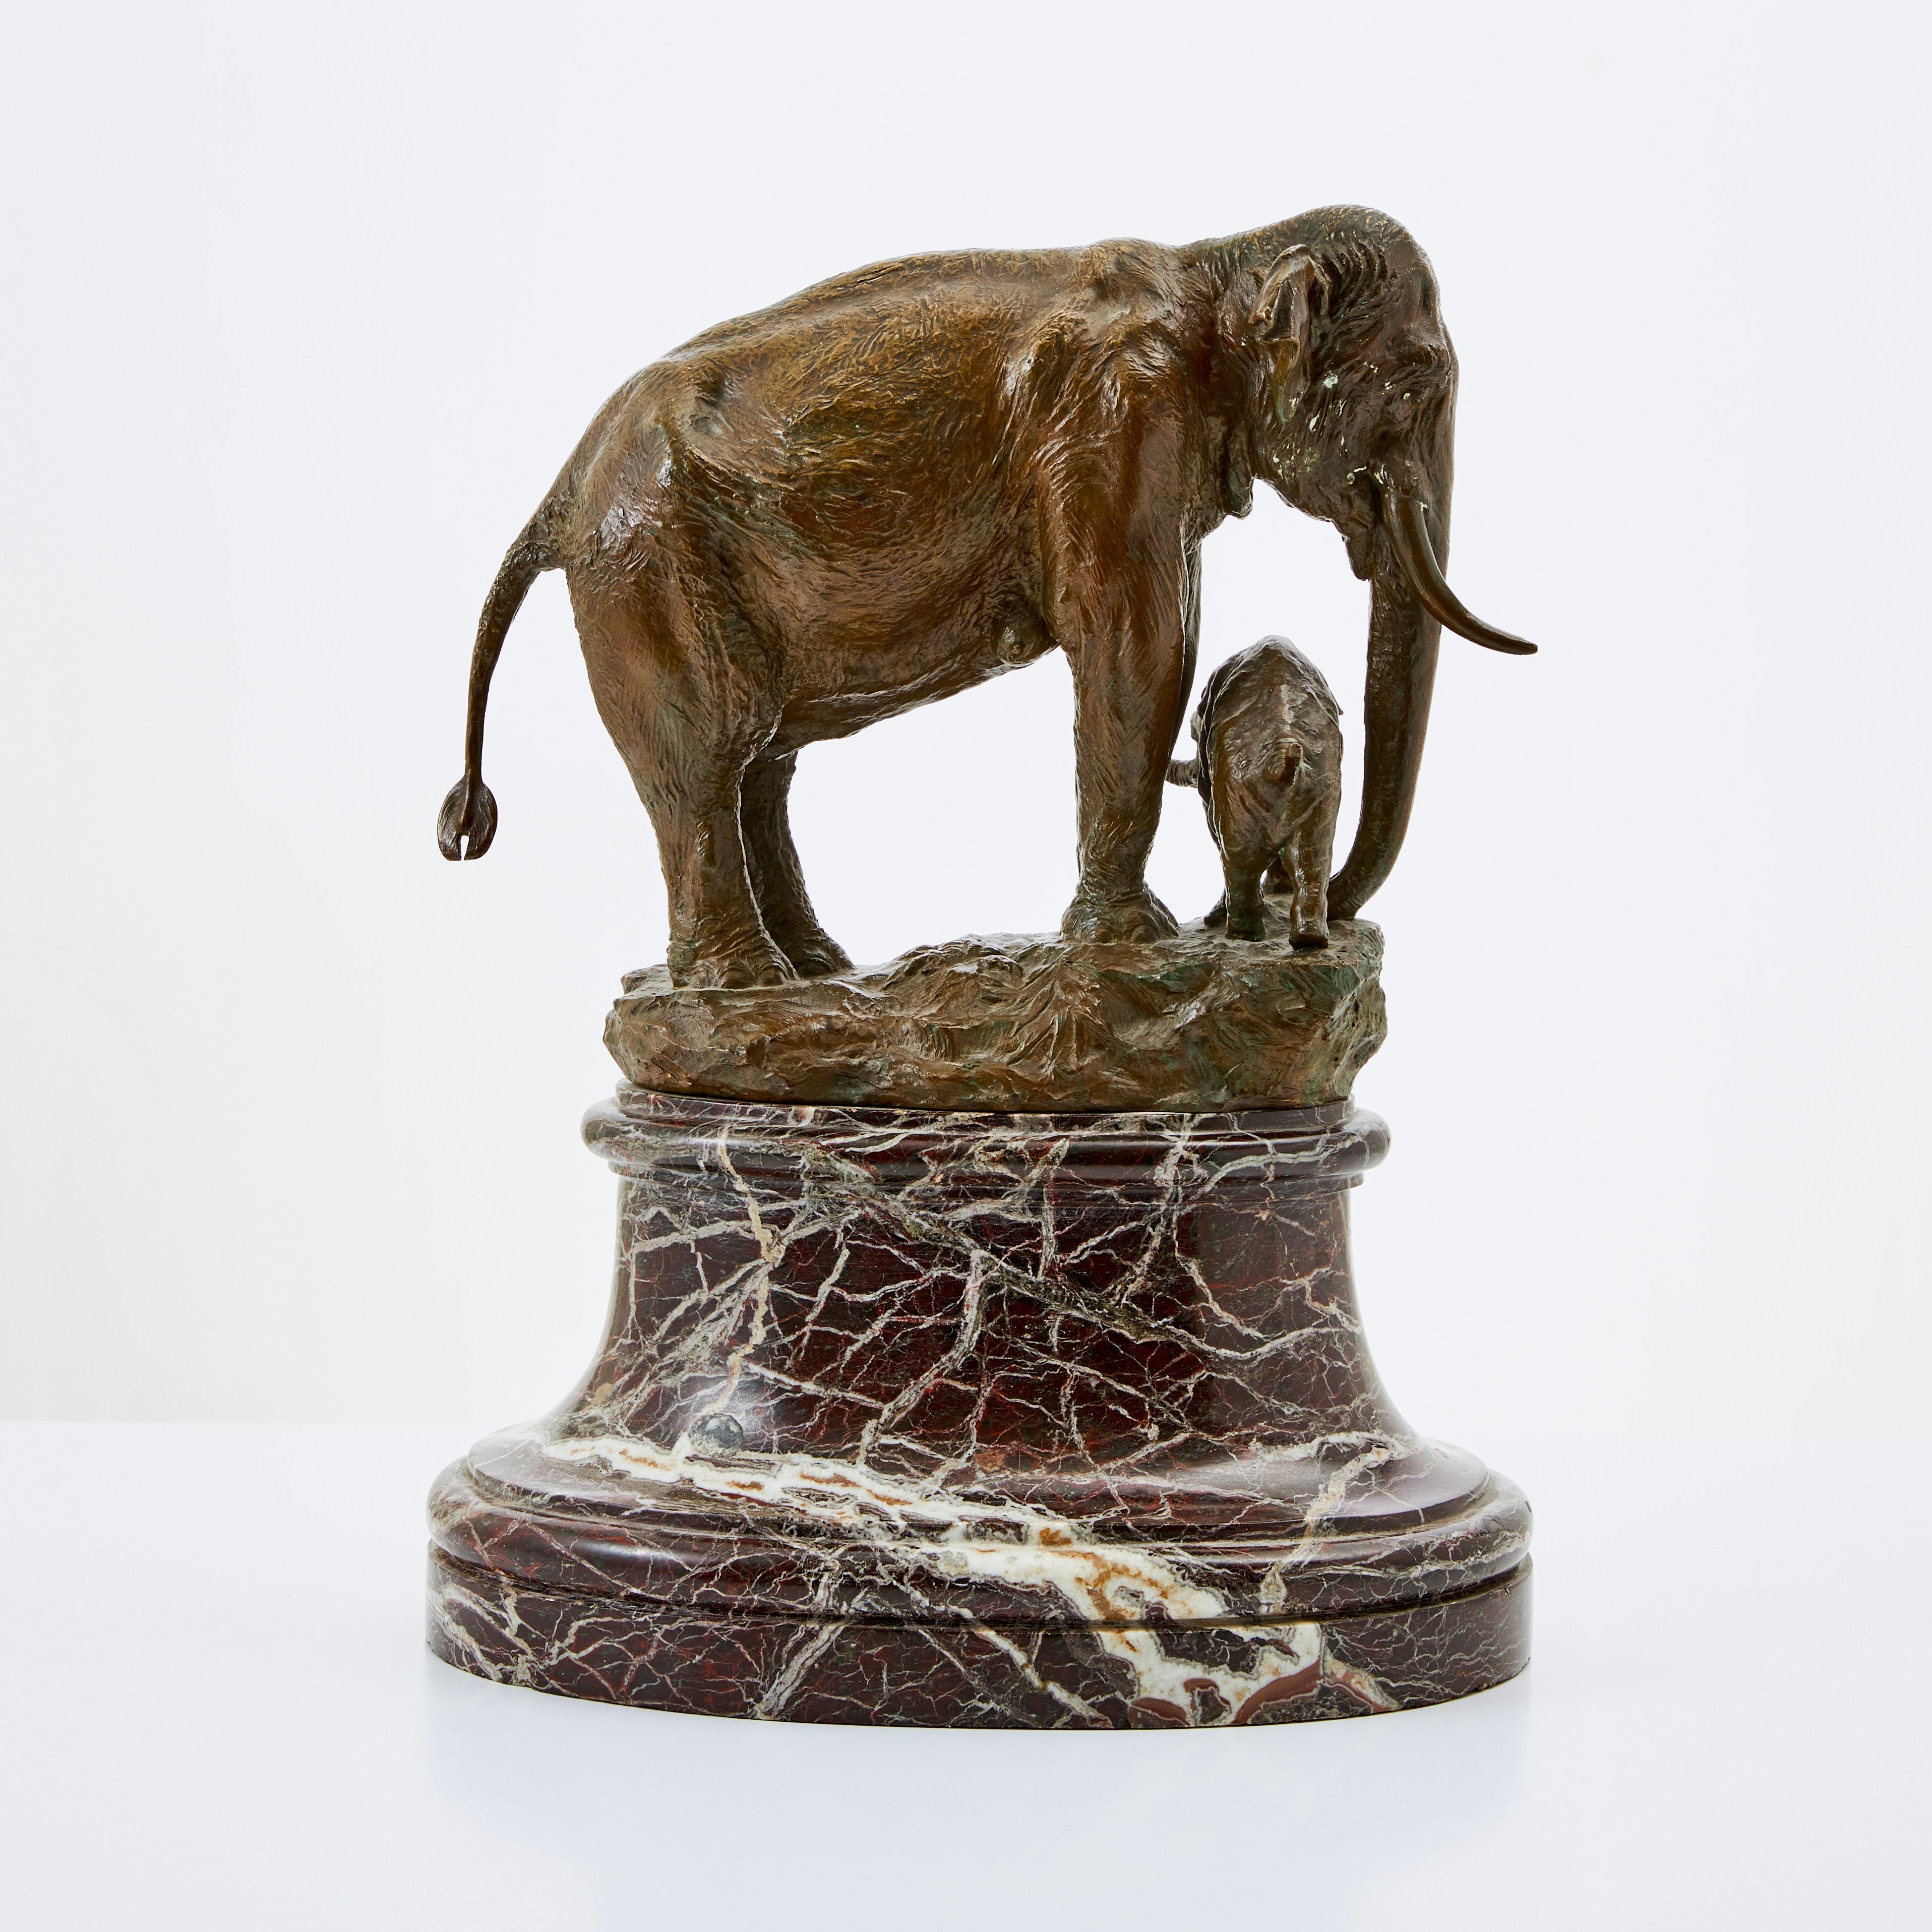 A fine patinated bronze sculpture of a mother elephant with her baby elephant by Niels Holm (1860-1933). Signed NIELS HOLM, ELEPHASINDICUS, ENDANGER. Also signed L. RASMUSSEN, KOBENHAVN which is the foundry. Mounted on a red marble base. 
Niels Holm